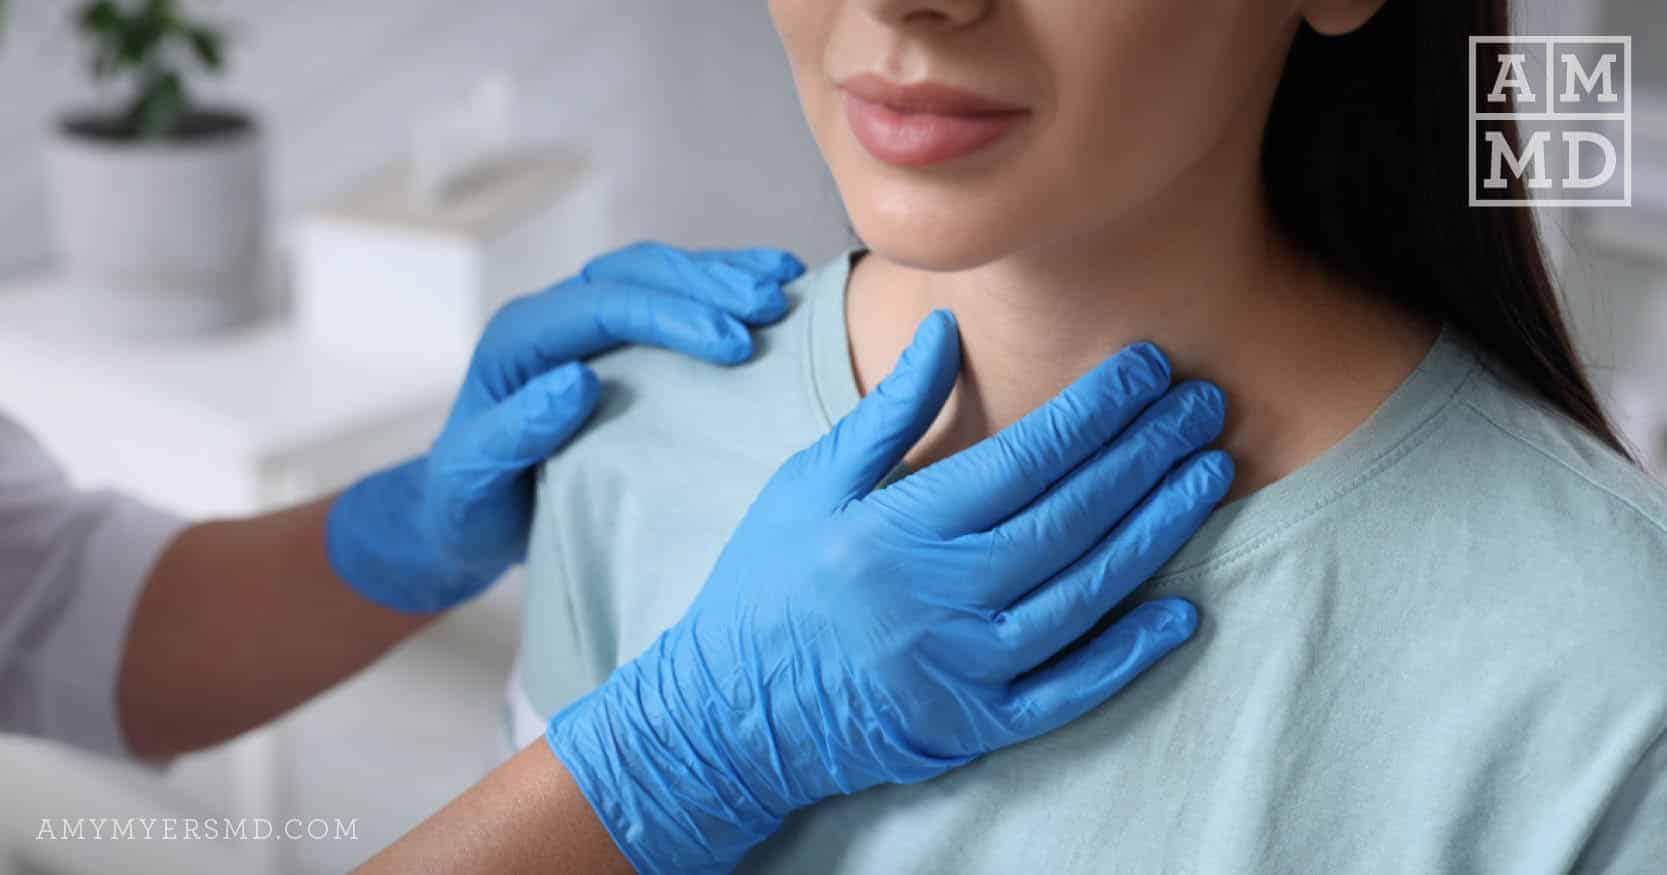 Doctor examining thyroid - Understanding Thyroid Test Results - Amy Myers MD®